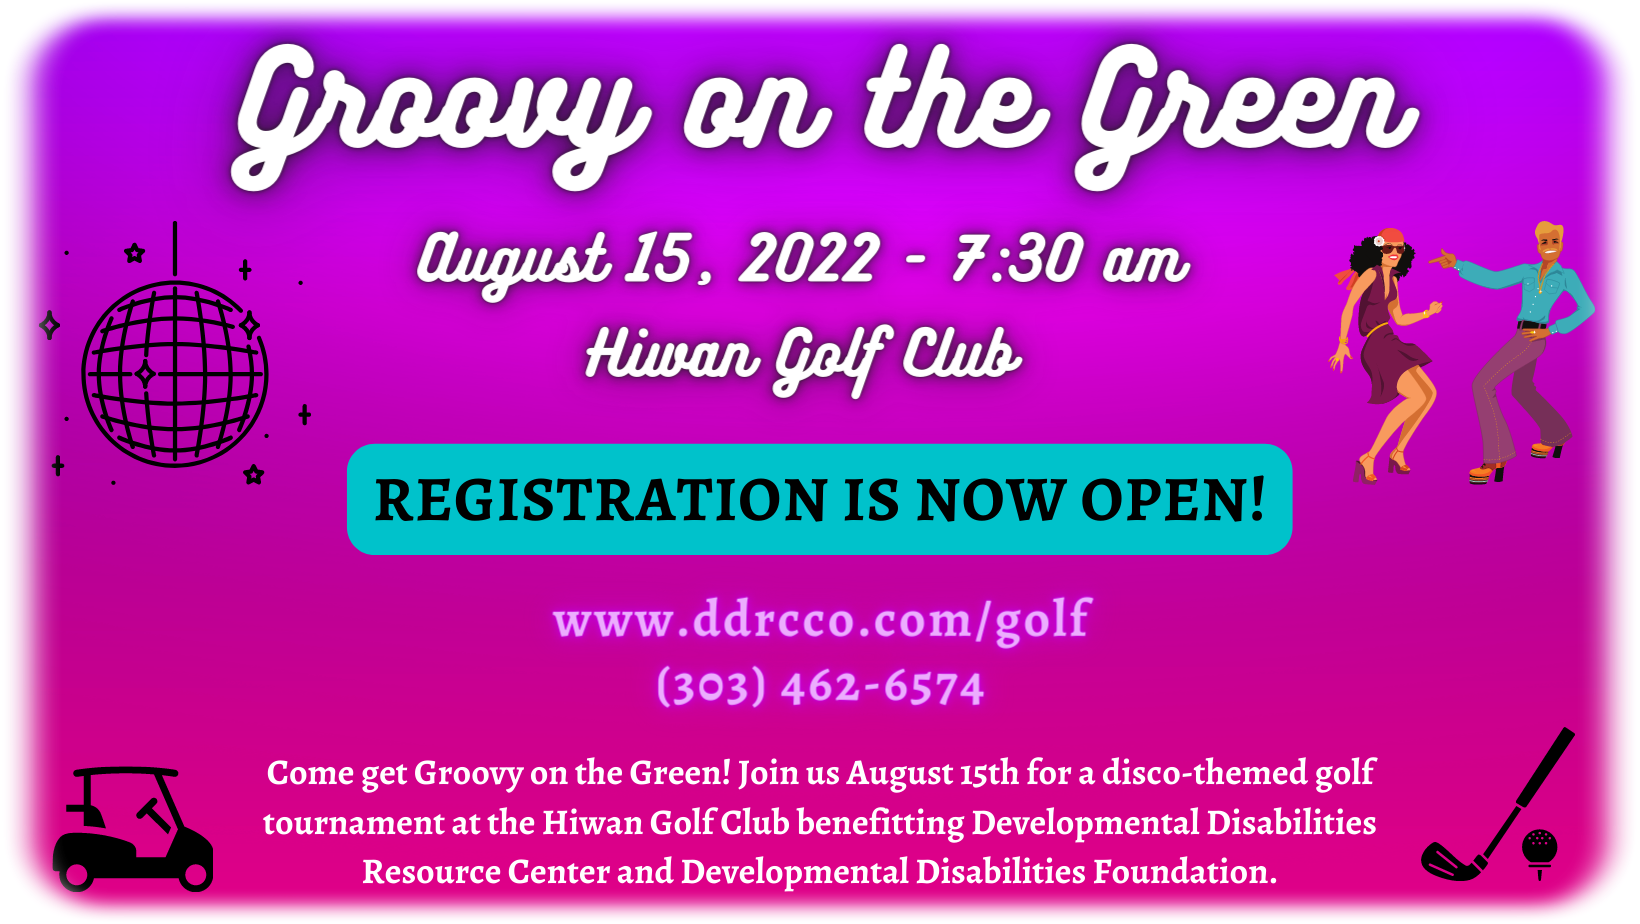 Groovy on the Green - 2022 Annual Golf Tournament